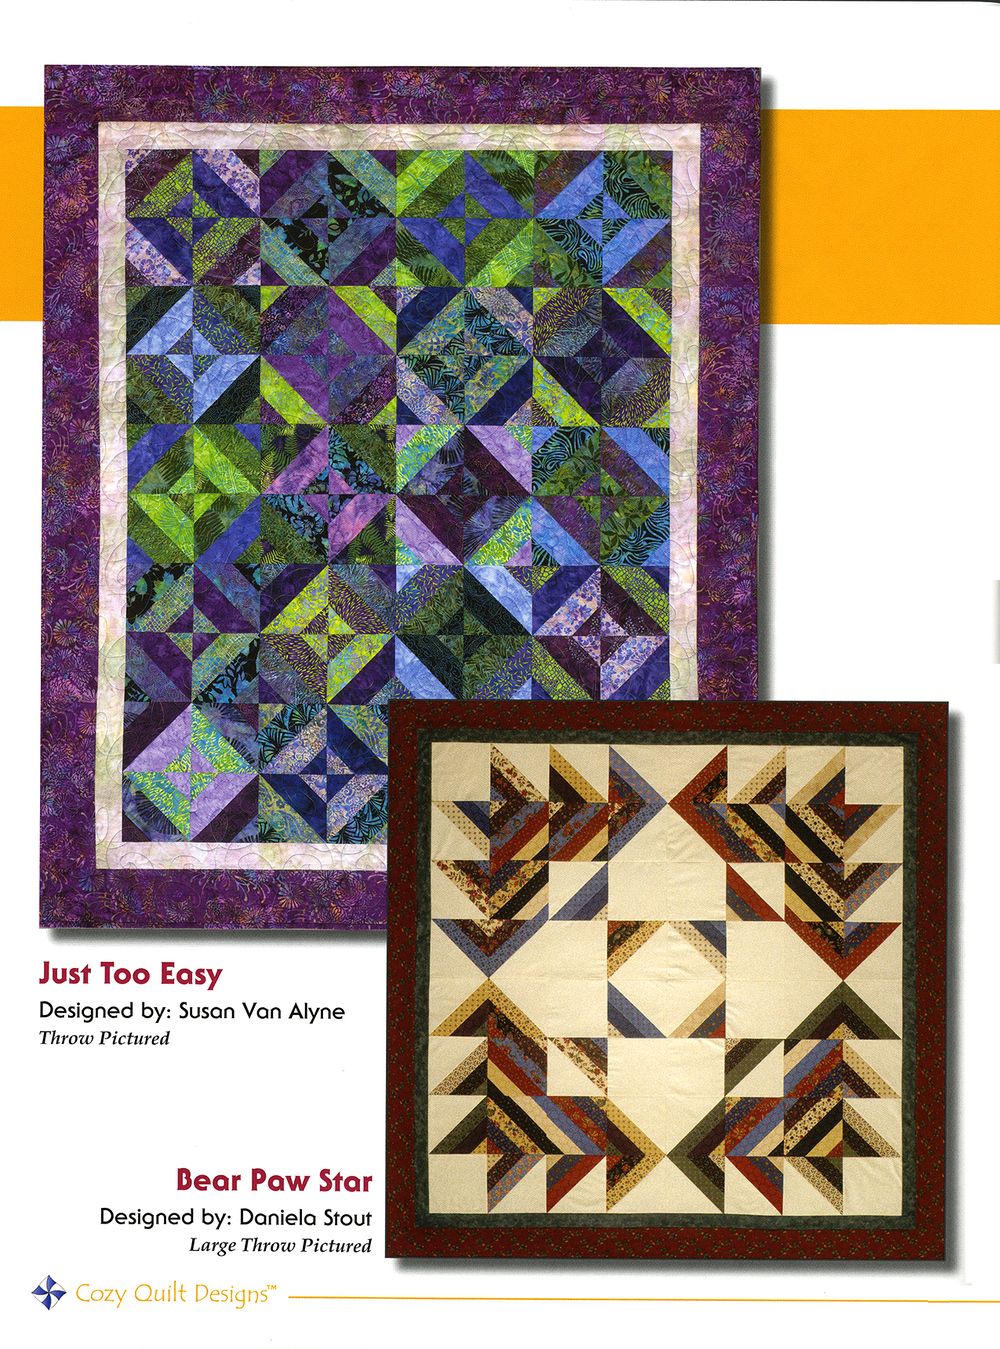 Strip Tubing Quilt Pattern Book by Daniela Stout of Cozy Quilt Designs